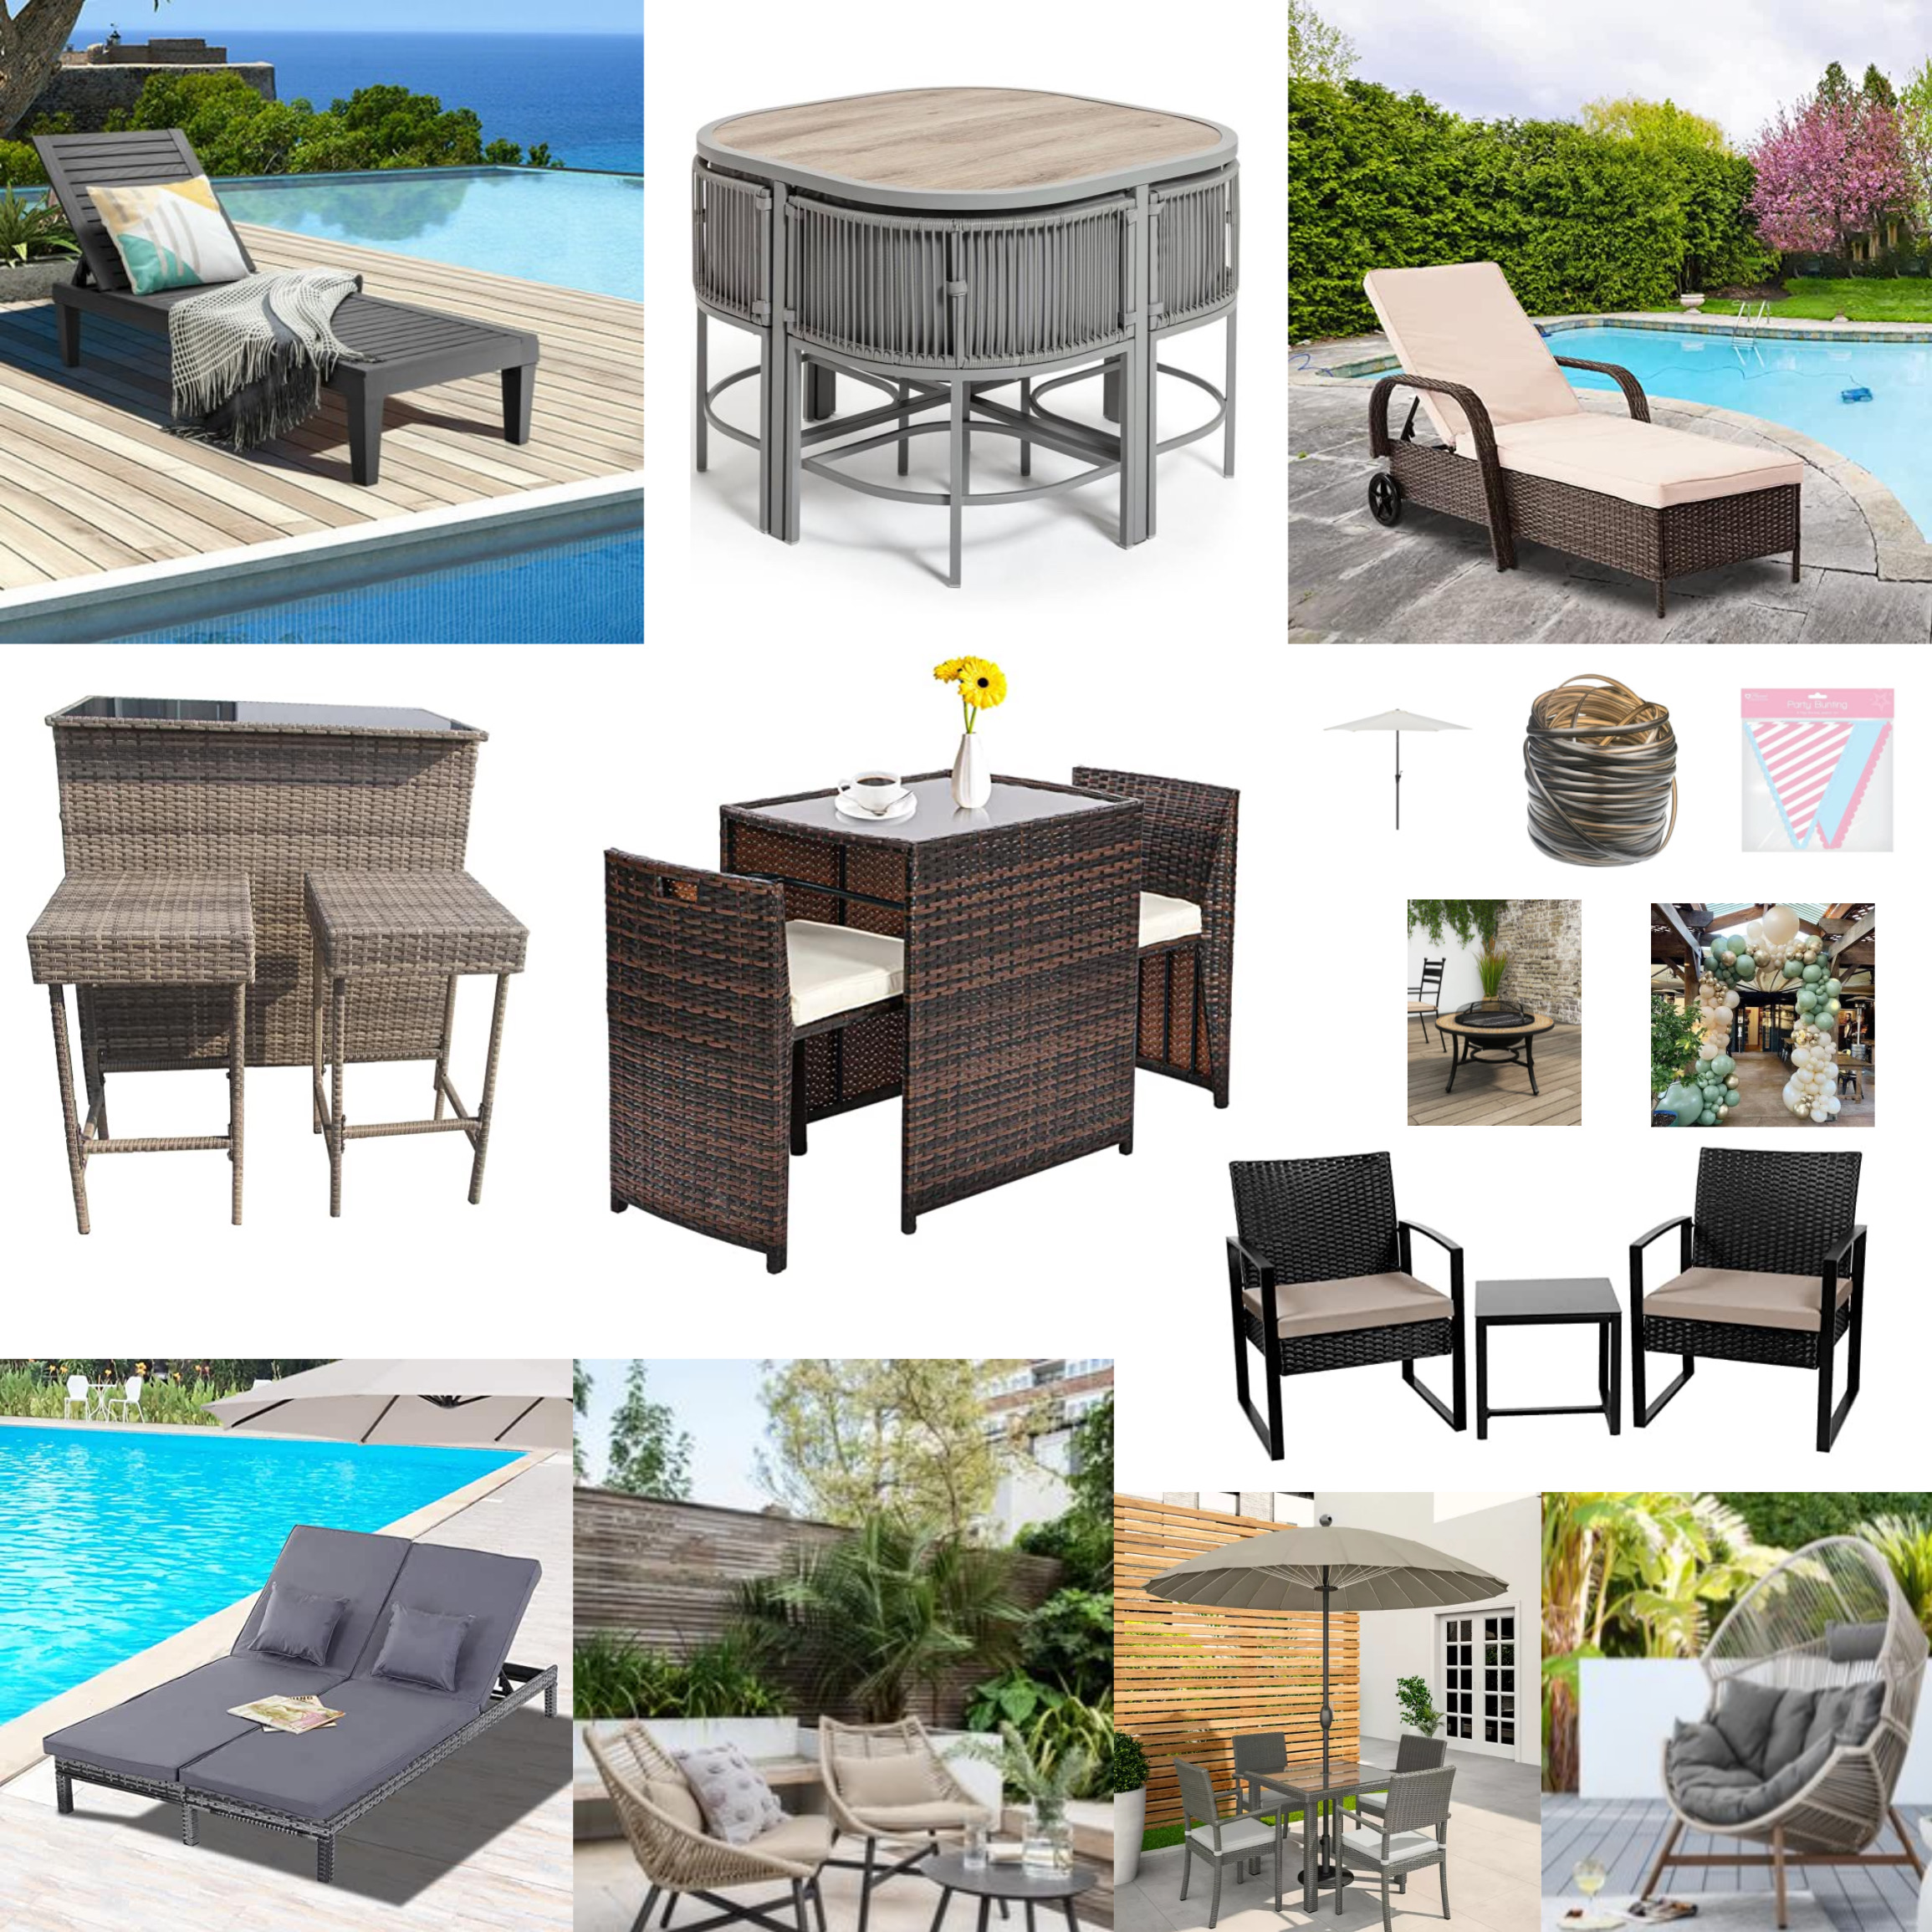 Collage of aesthetic garden furniture